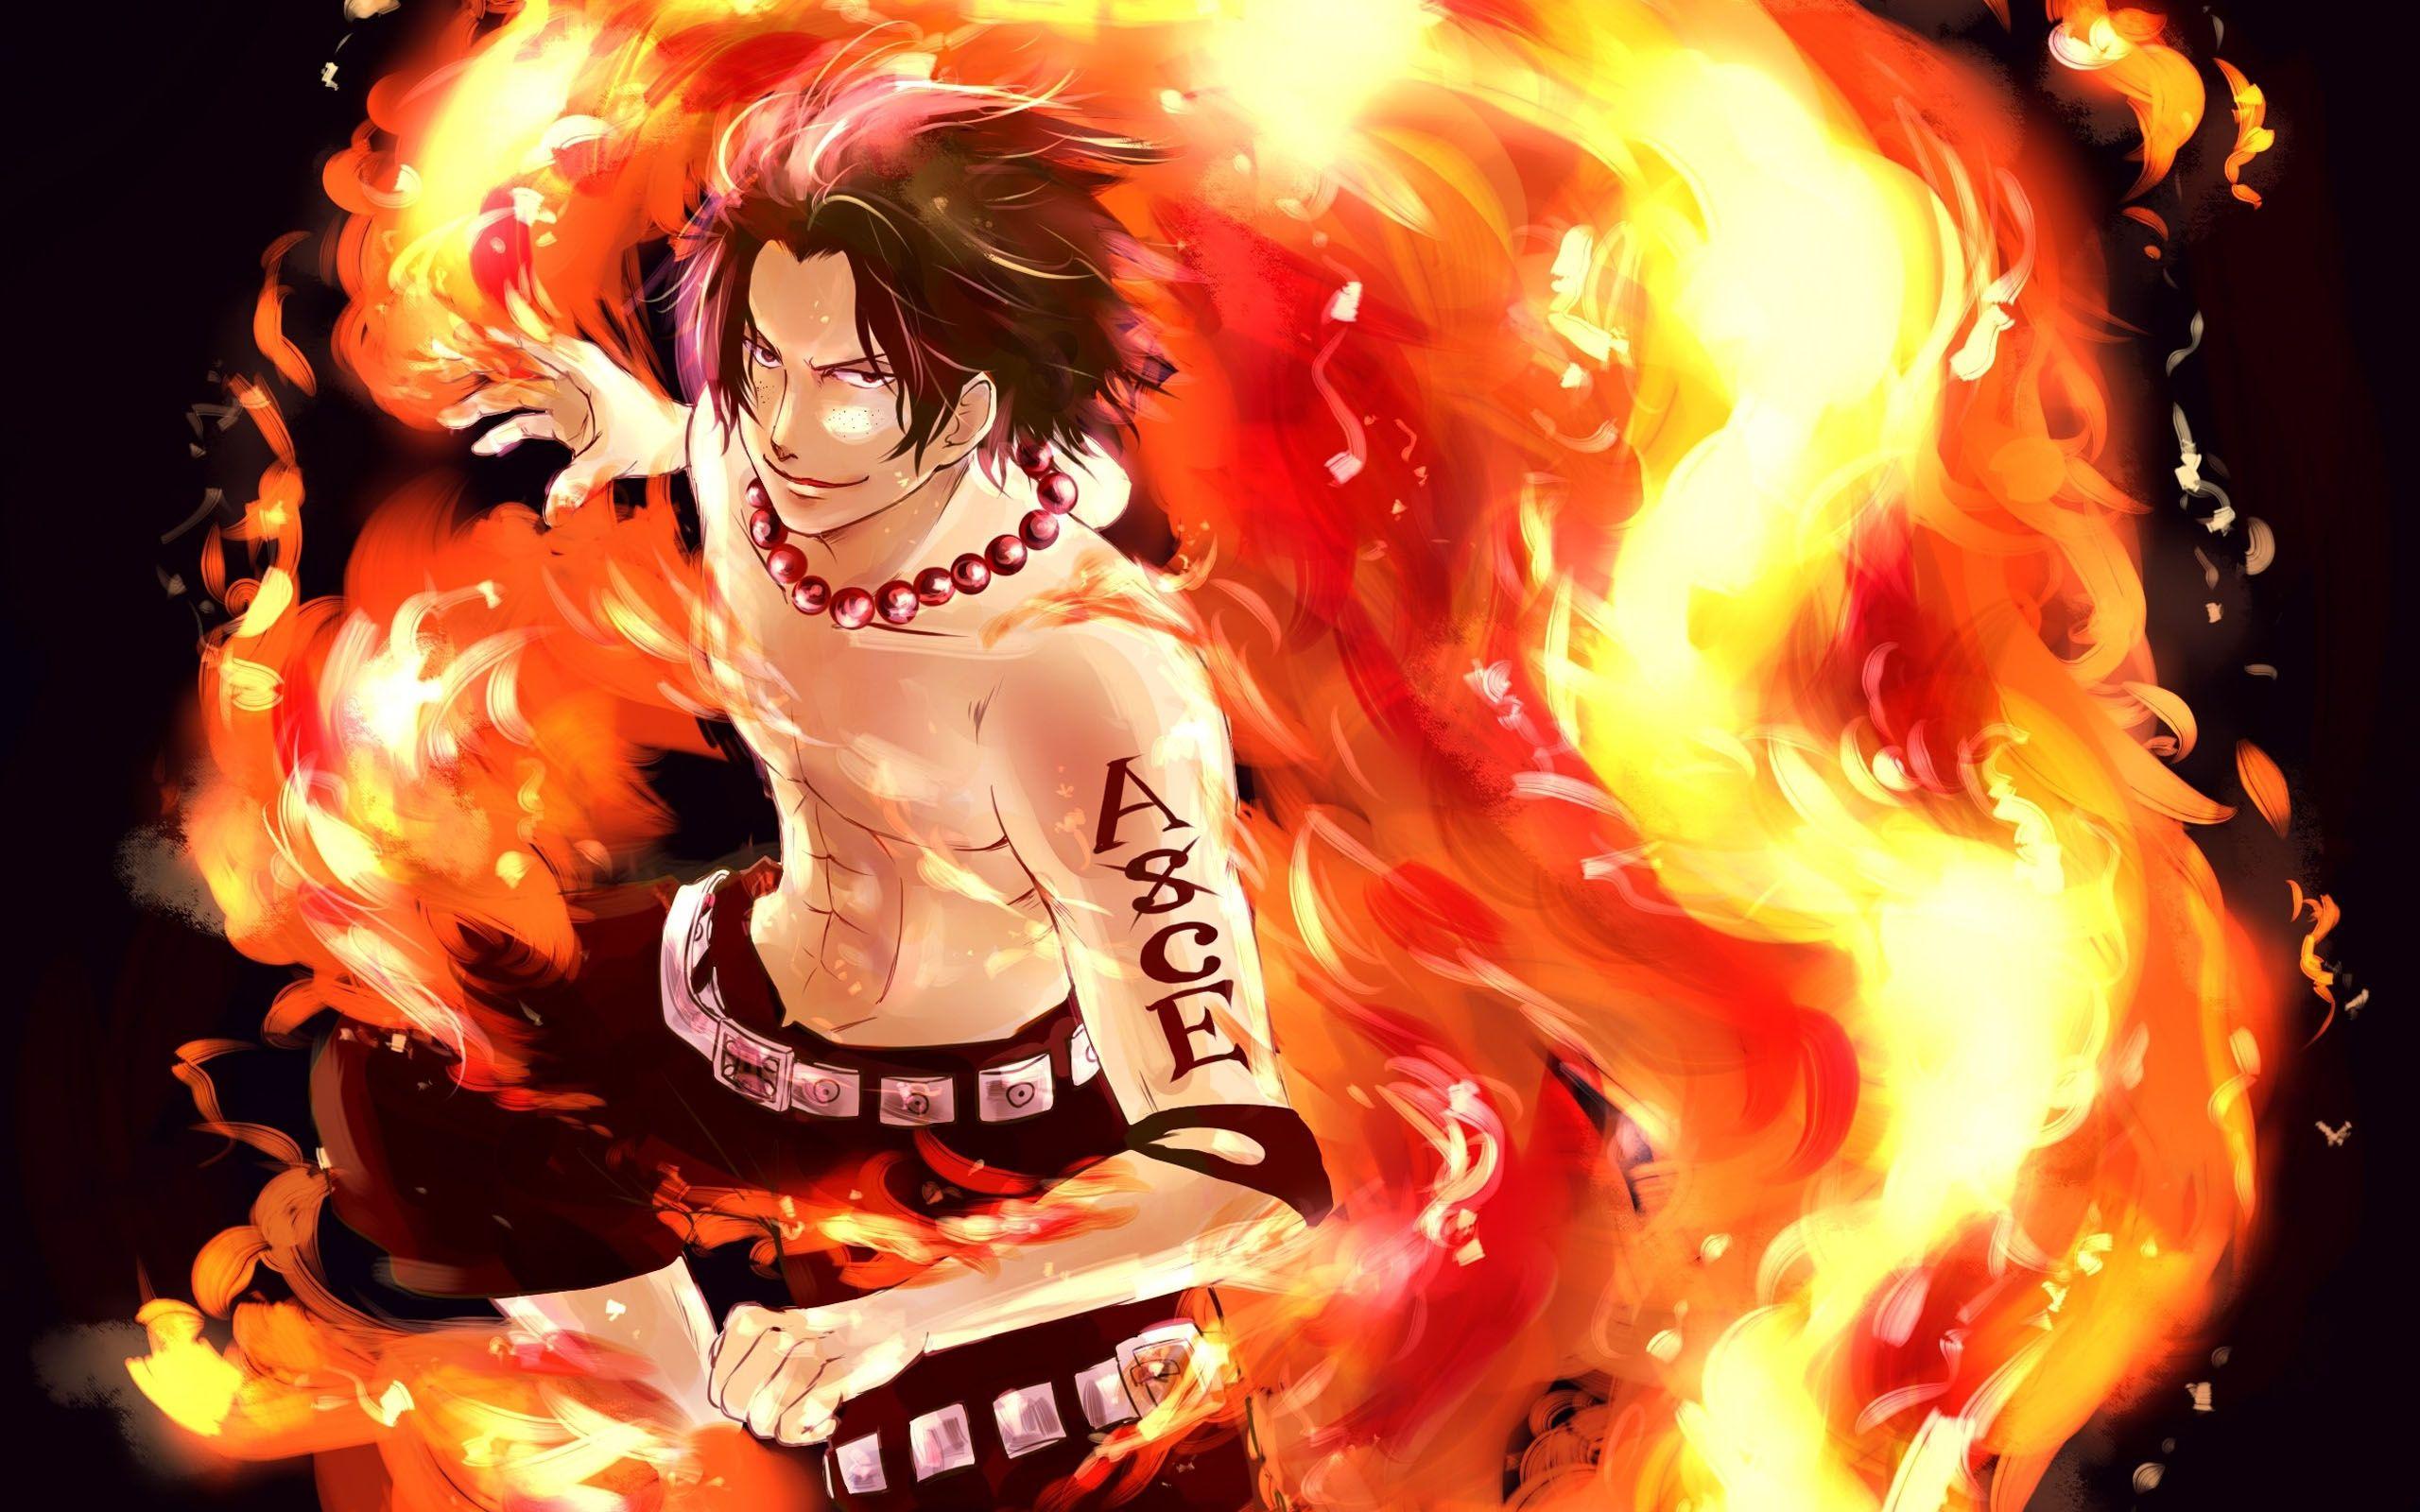 HD One Piece Ace Wallpaper and Photo. HD Anime Wallpaper